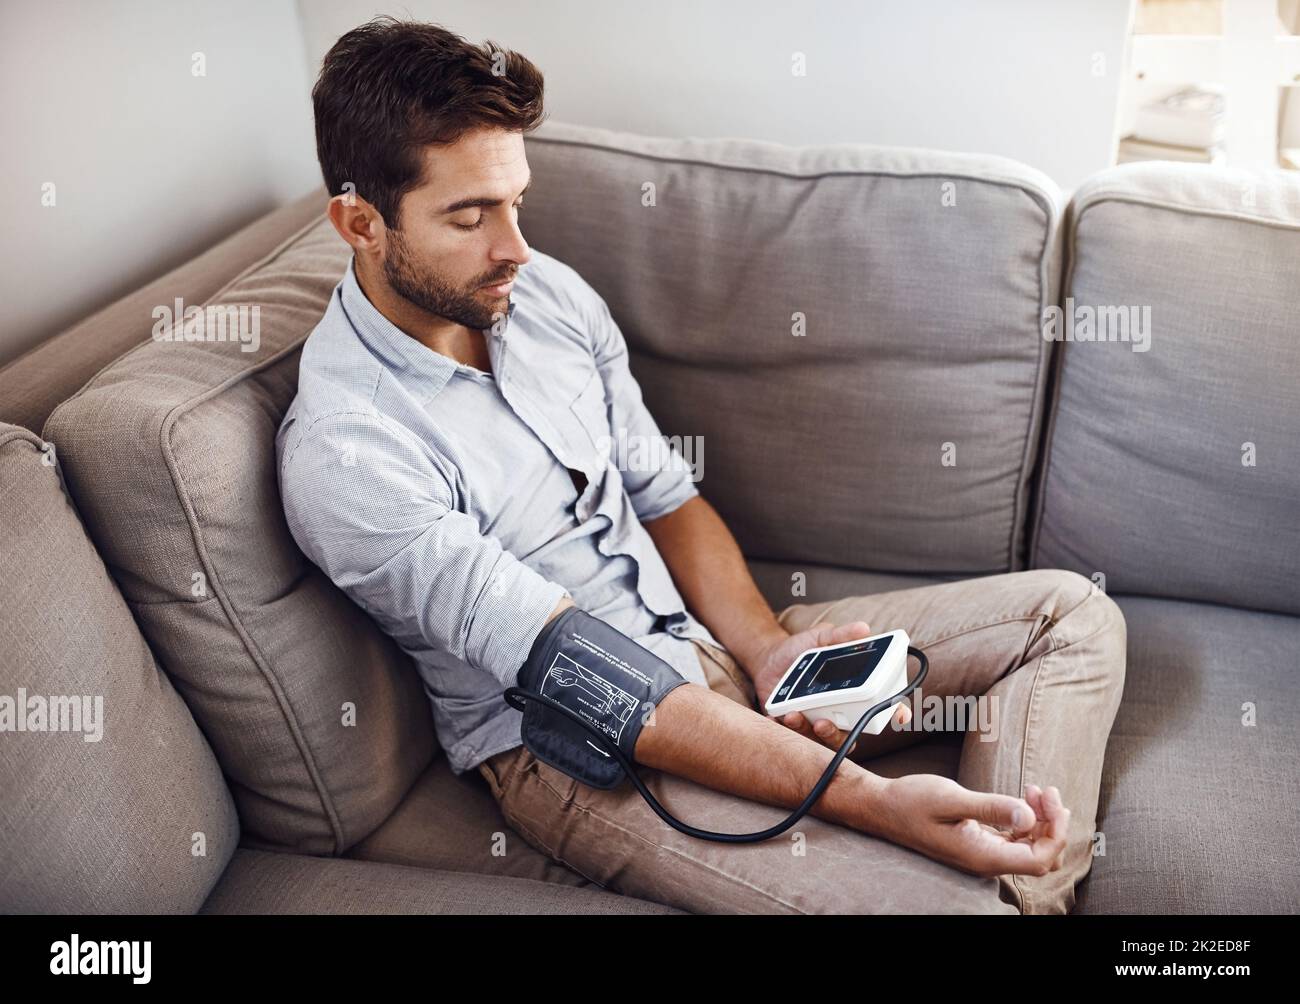 Doing my regular checkup. Shot of a young man taking his own blood pressure readings with a blood pressure monitor at home. Stock Photo